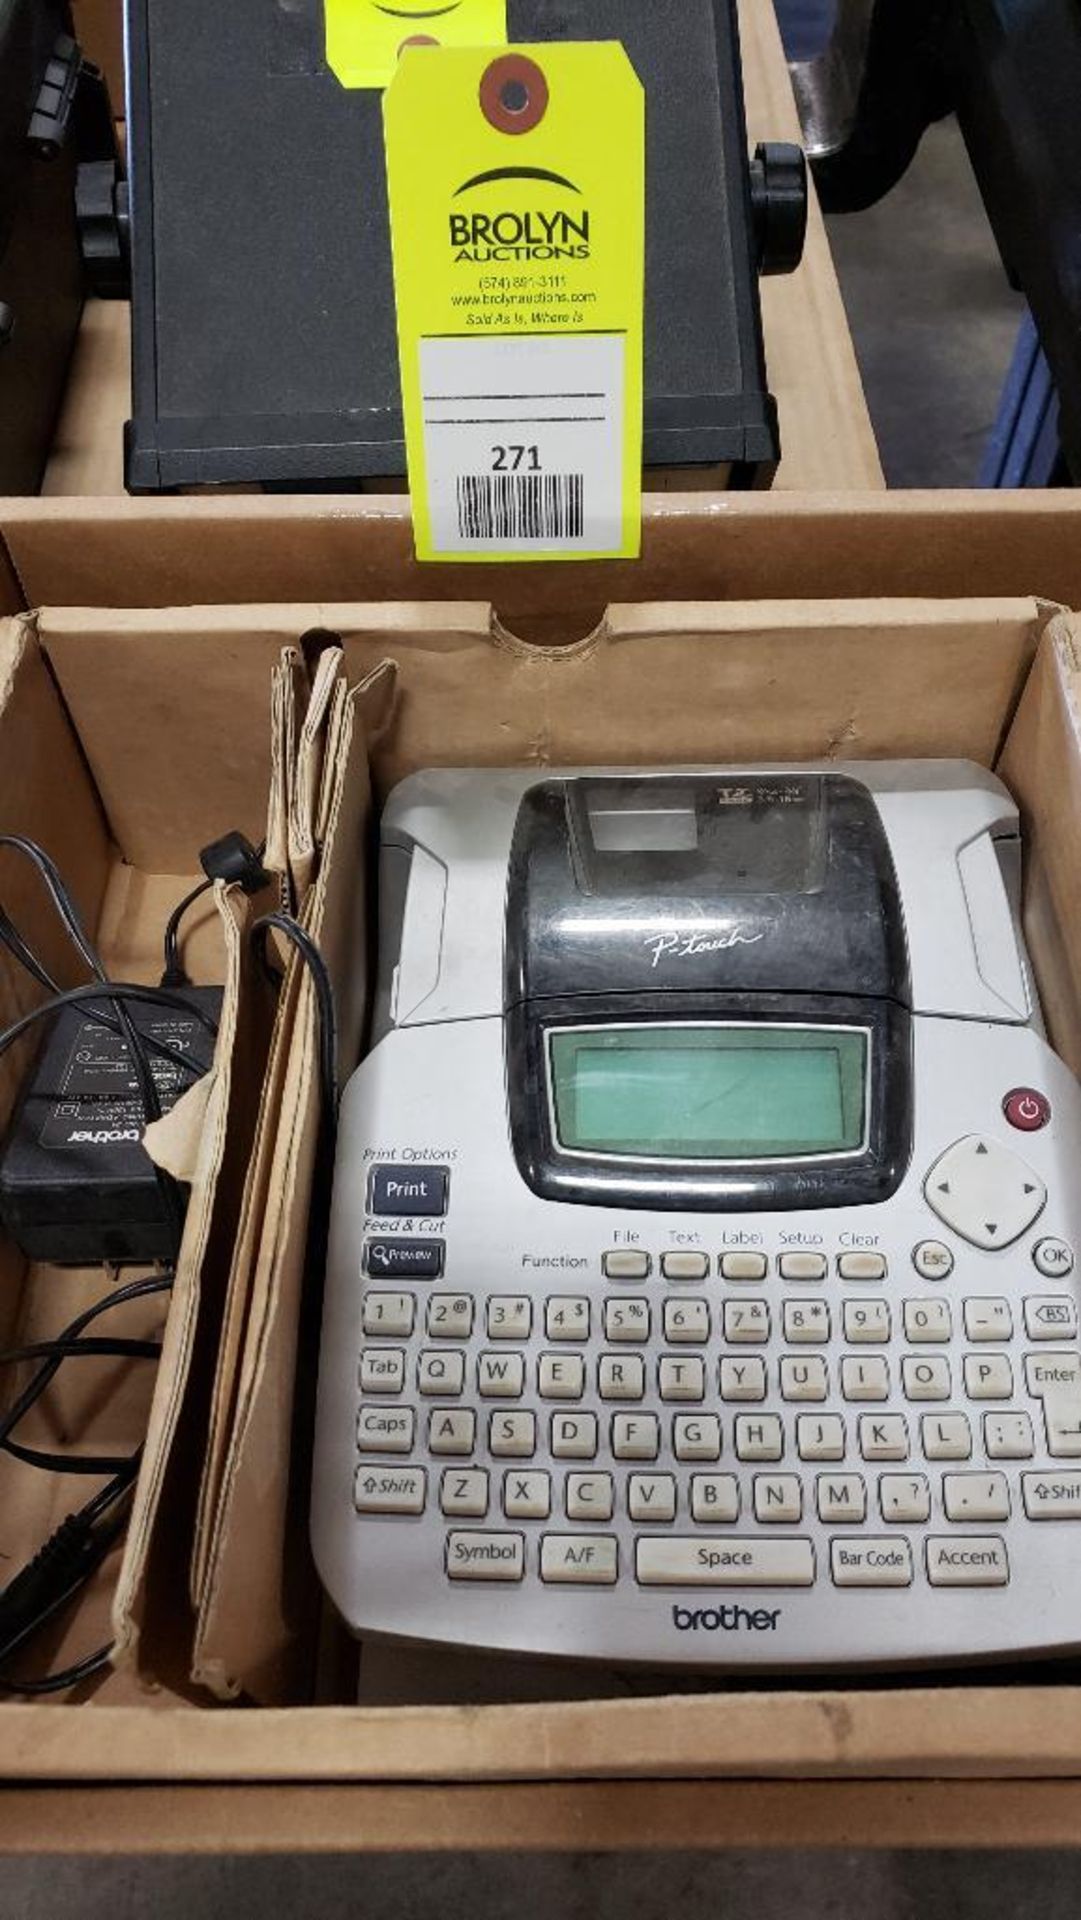 Brother P-touch label printer.